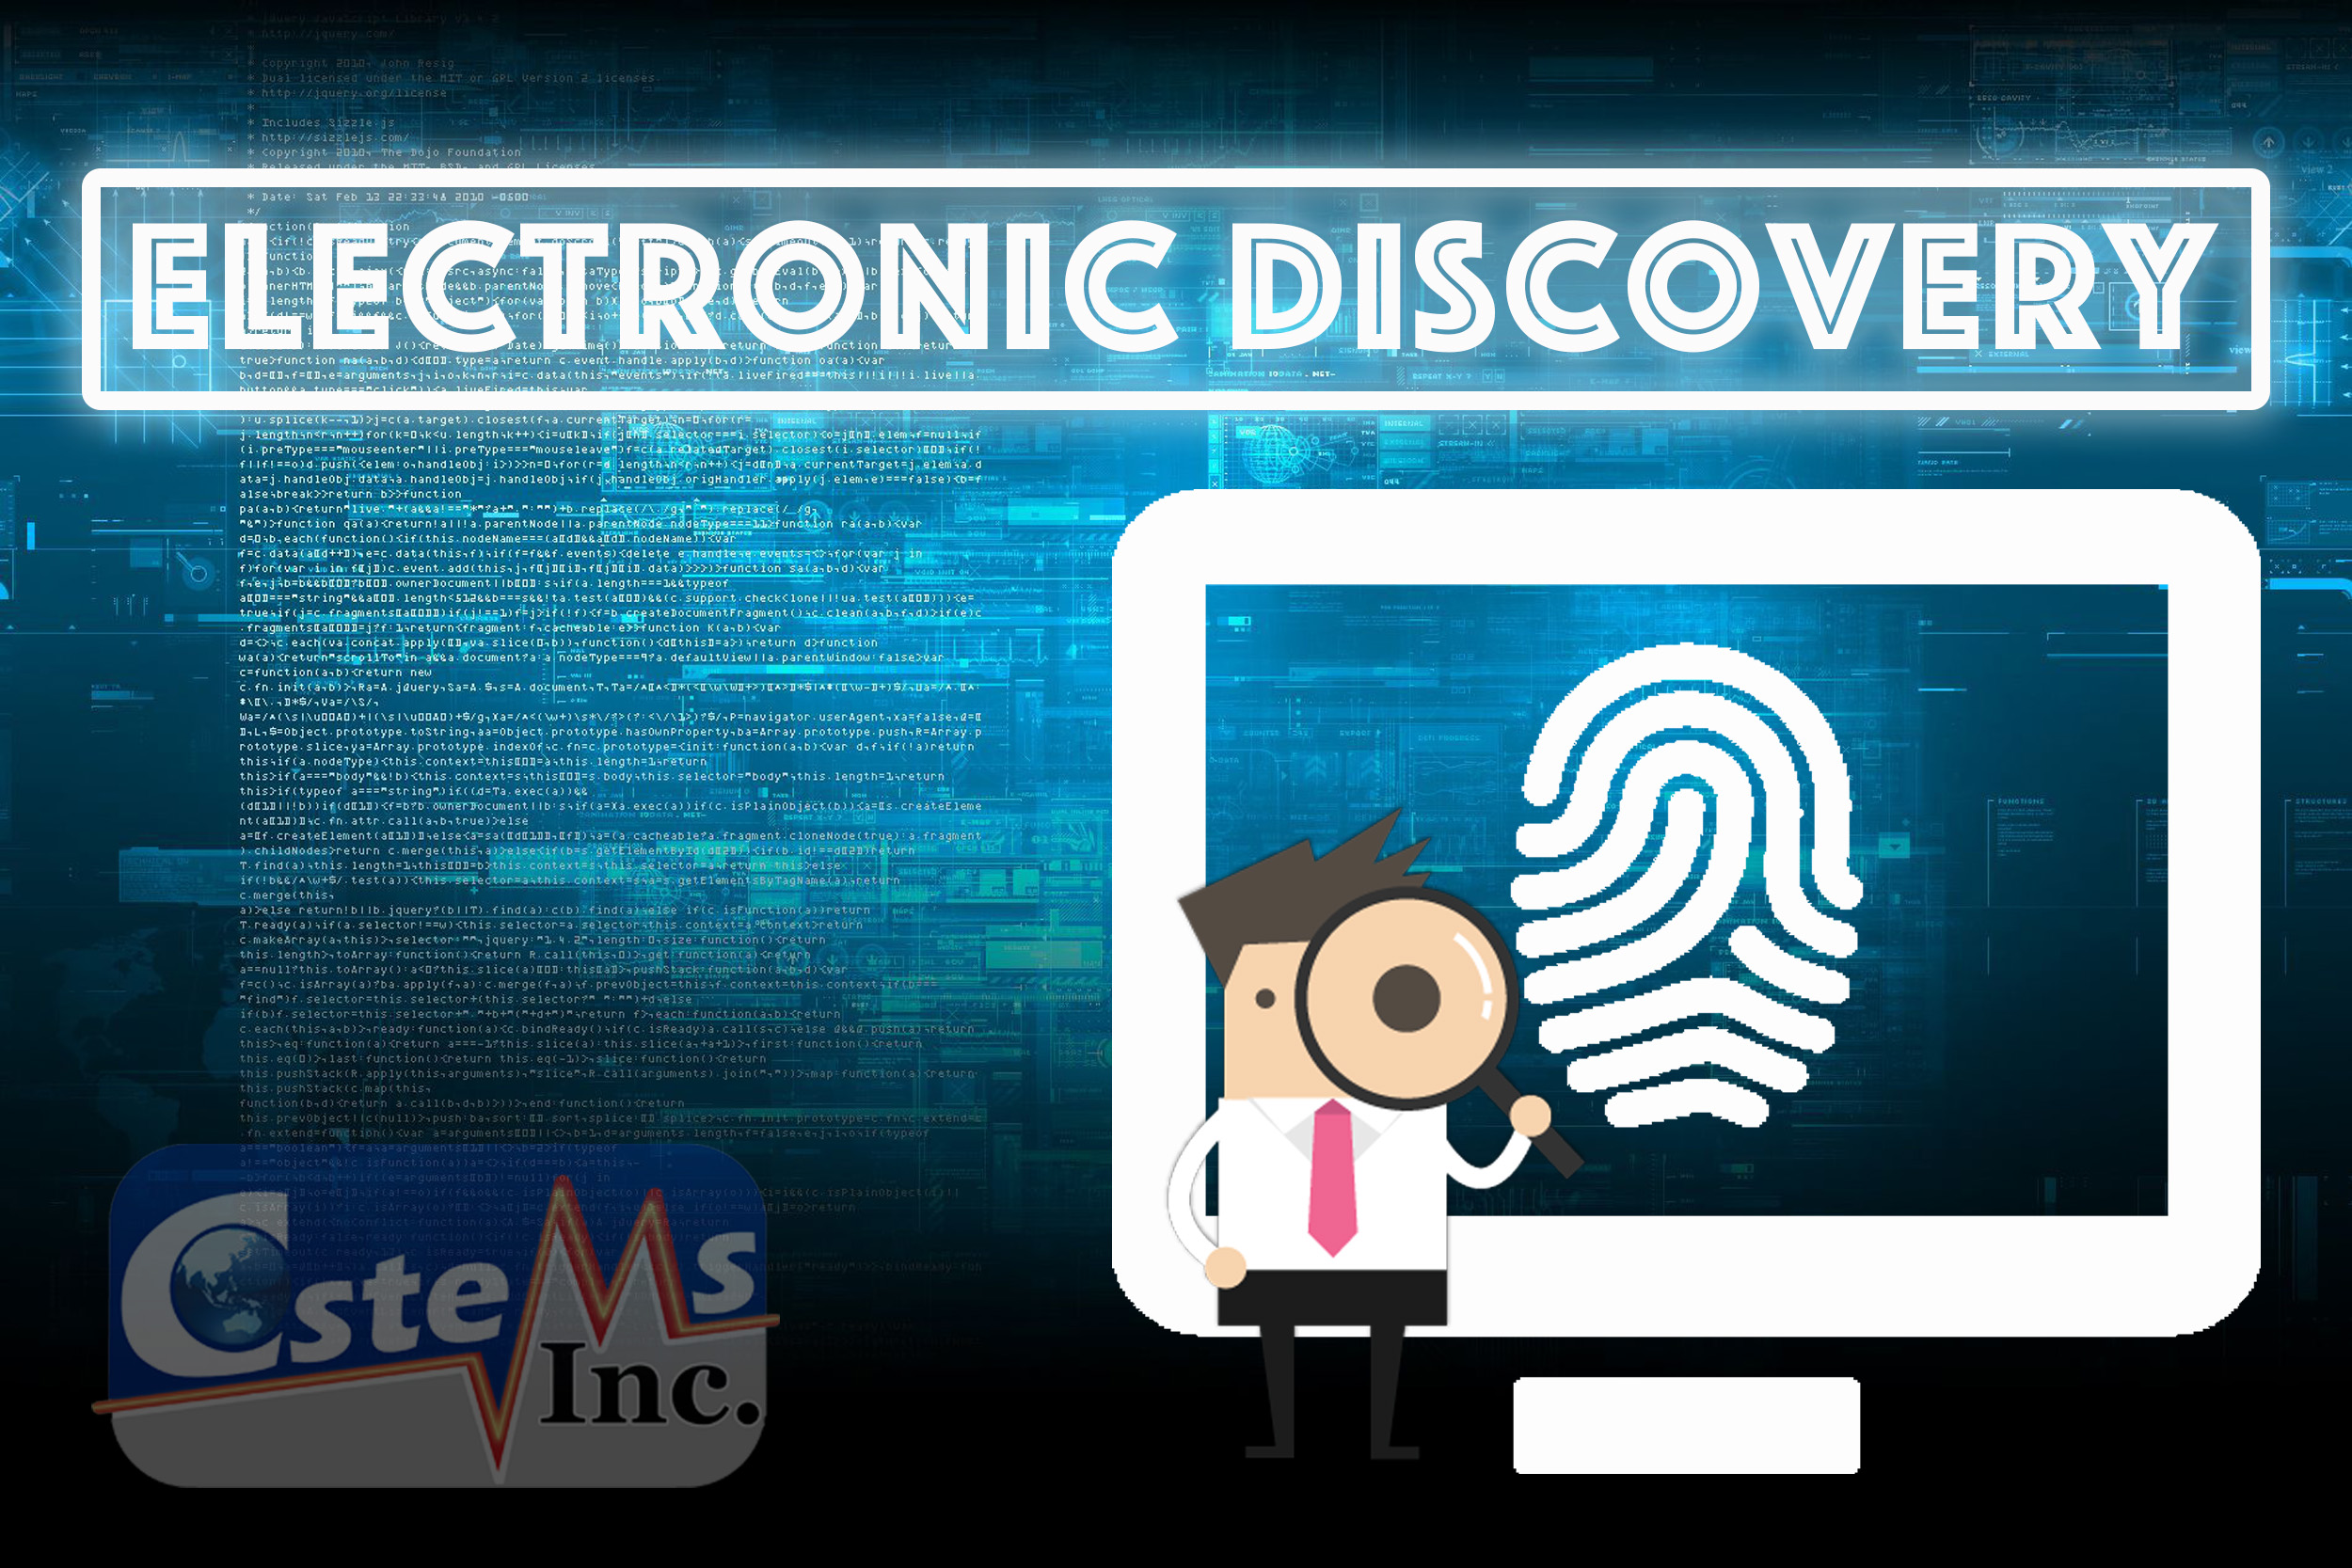 Electronic Discovery